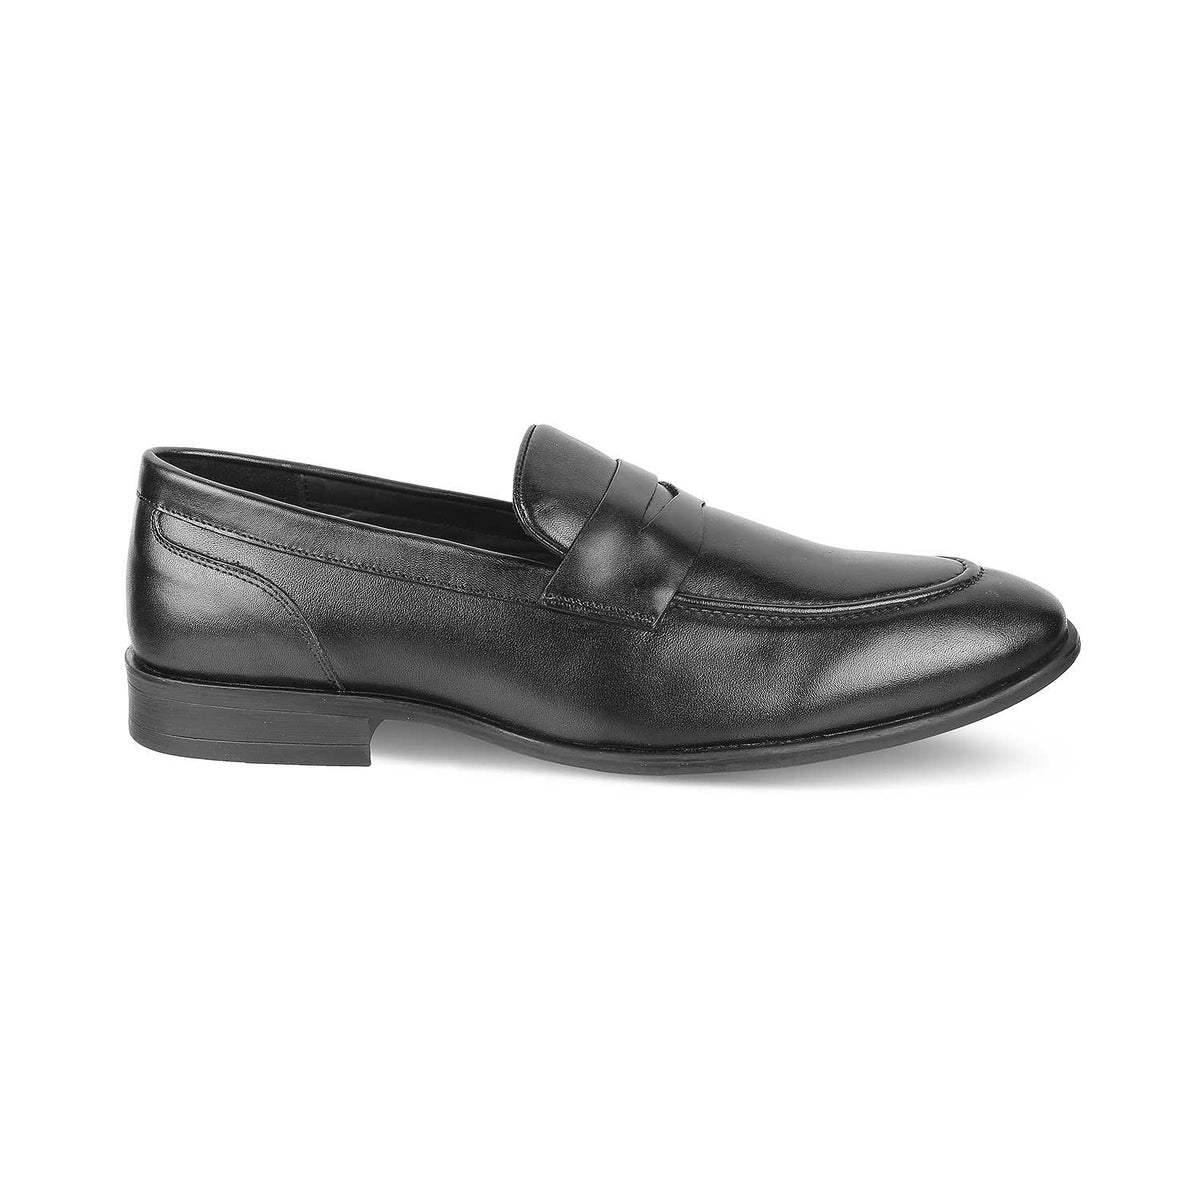 Tresmode Dawson Black Men's Leather Penny Loafers - Tresmode